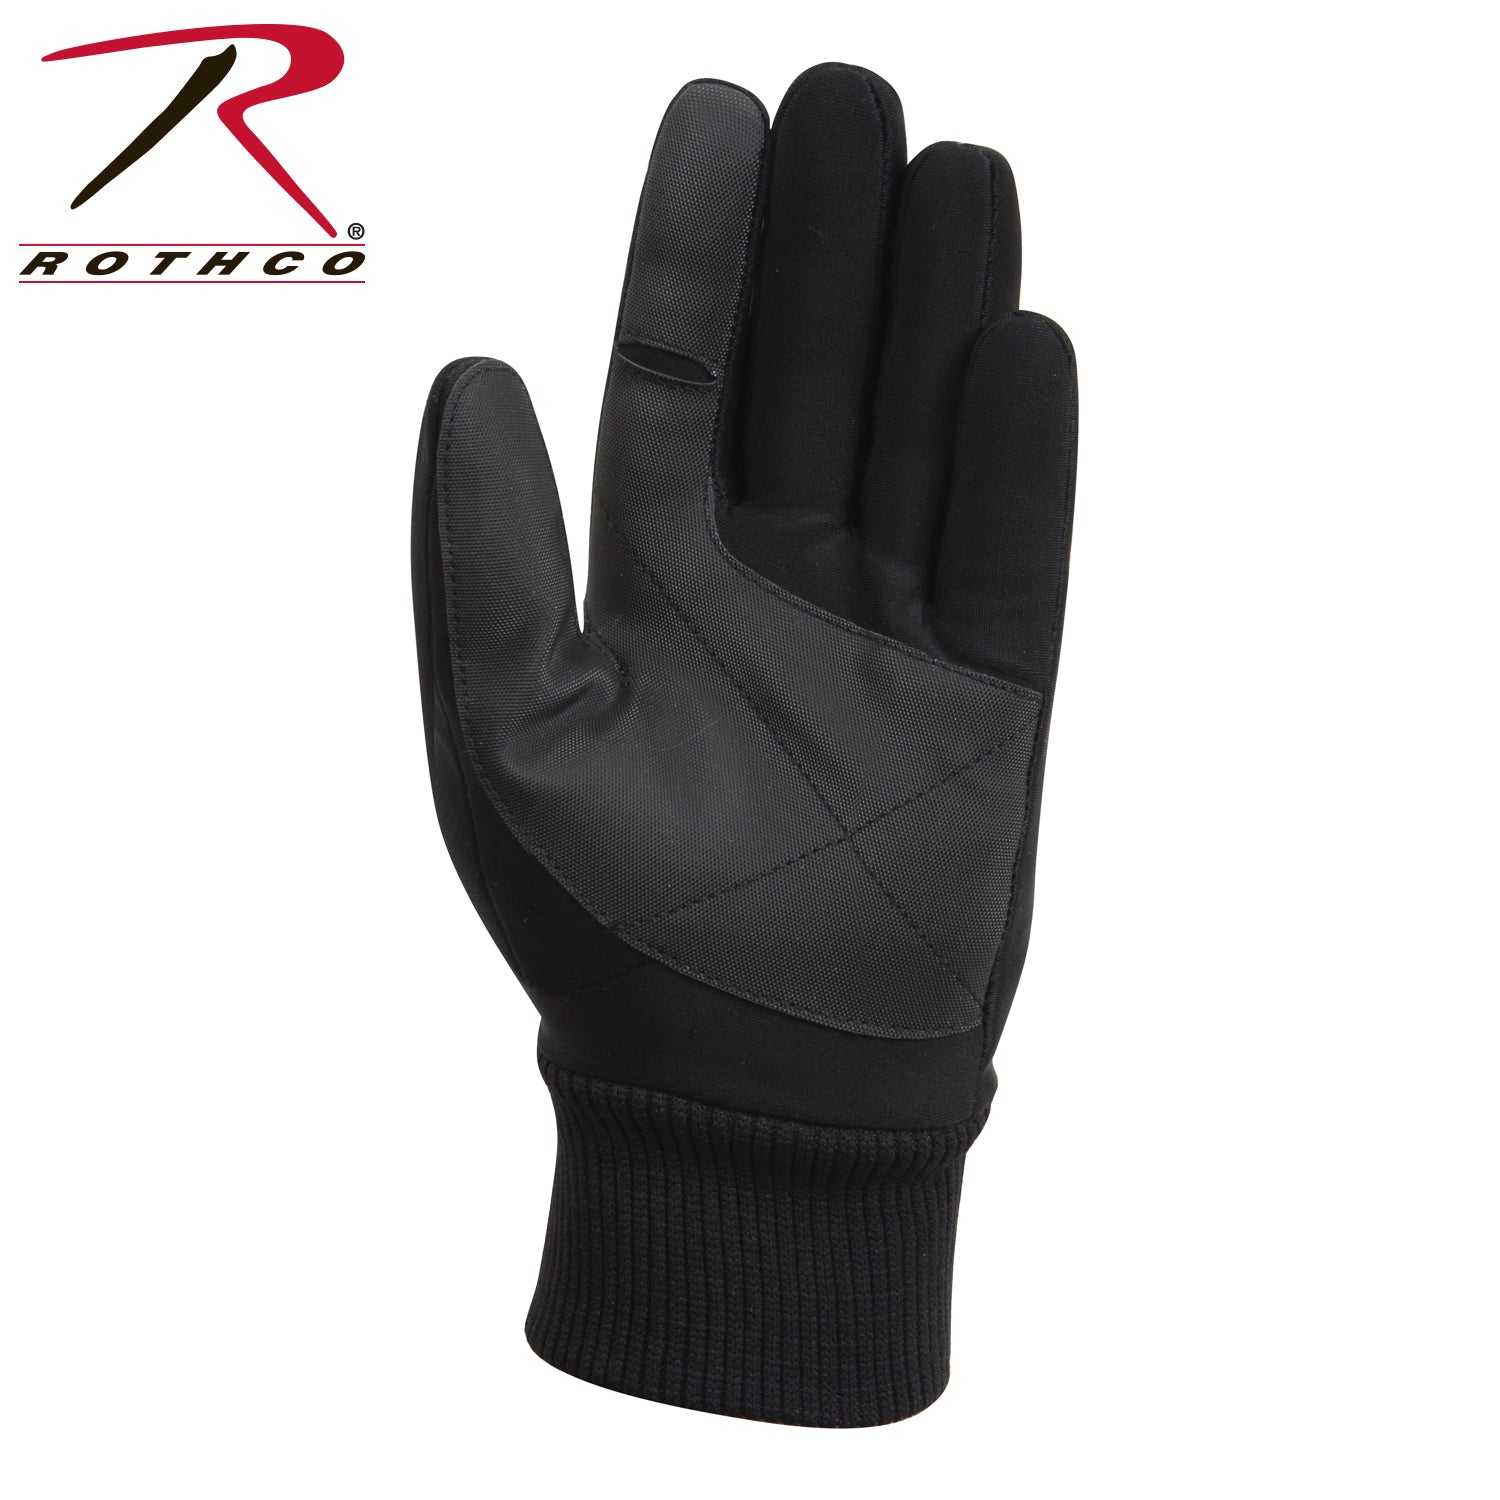 Rothco Soft Shell Gloves - Tactical Choice Plus